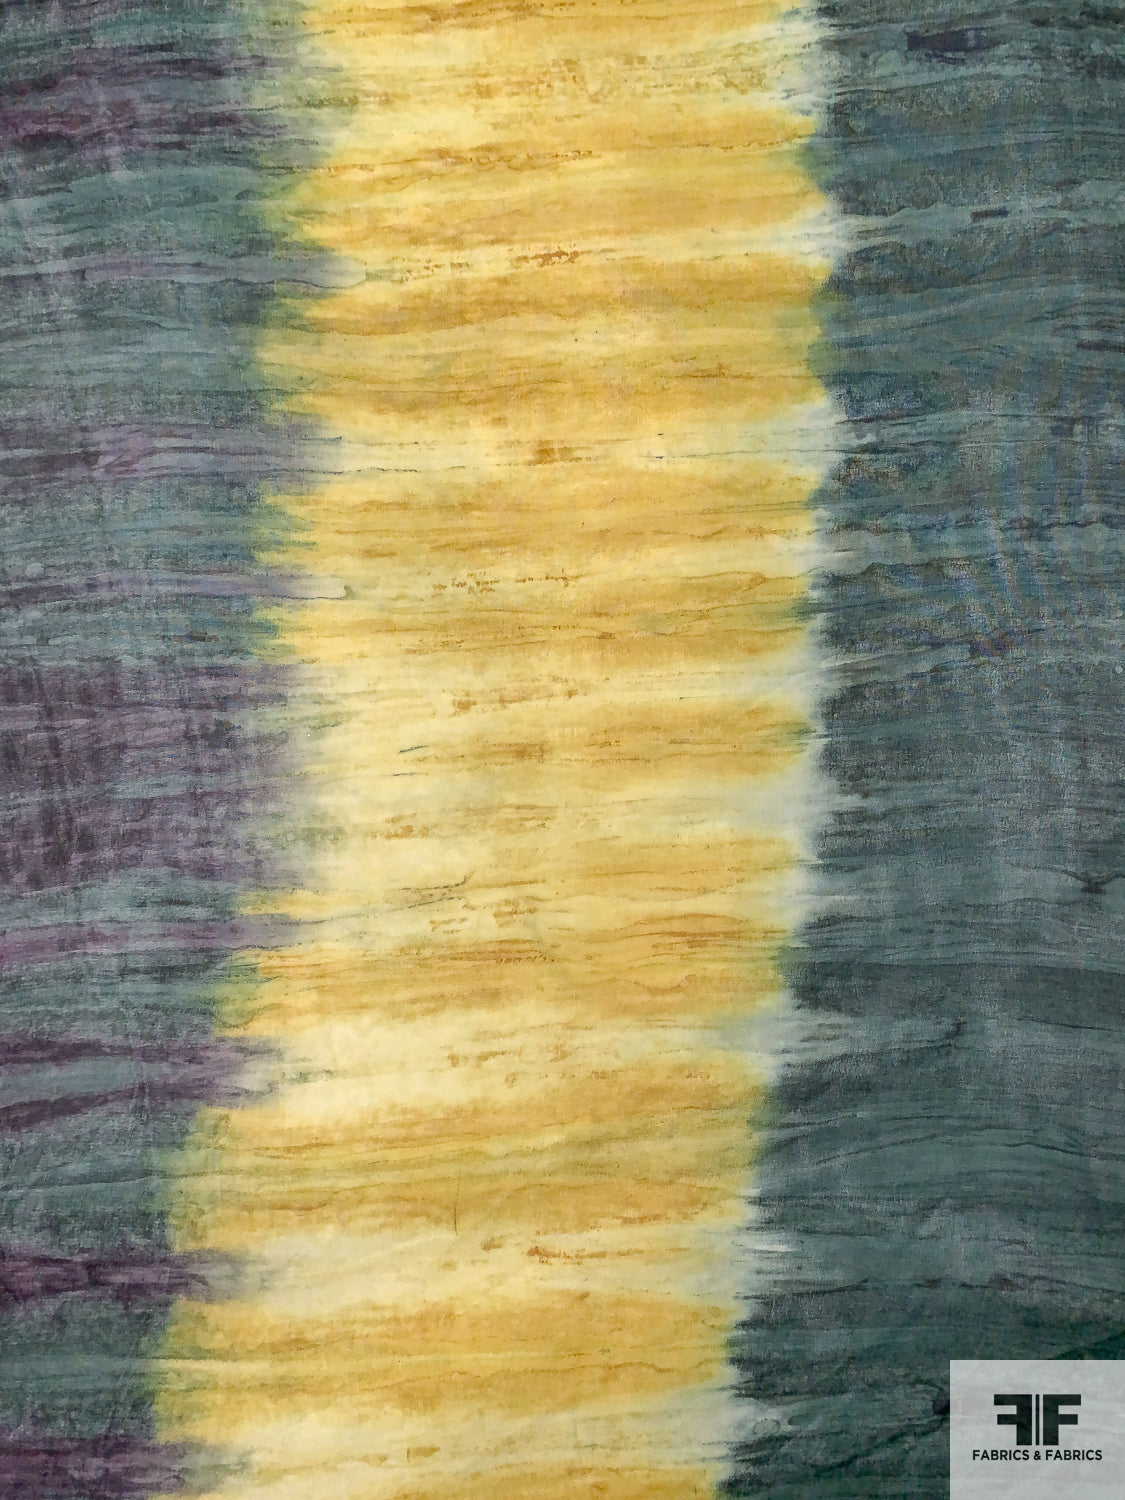 Watercolor Tie-Dye Printed Silk Chiffon - Yellow / Forest Teal / Magenta